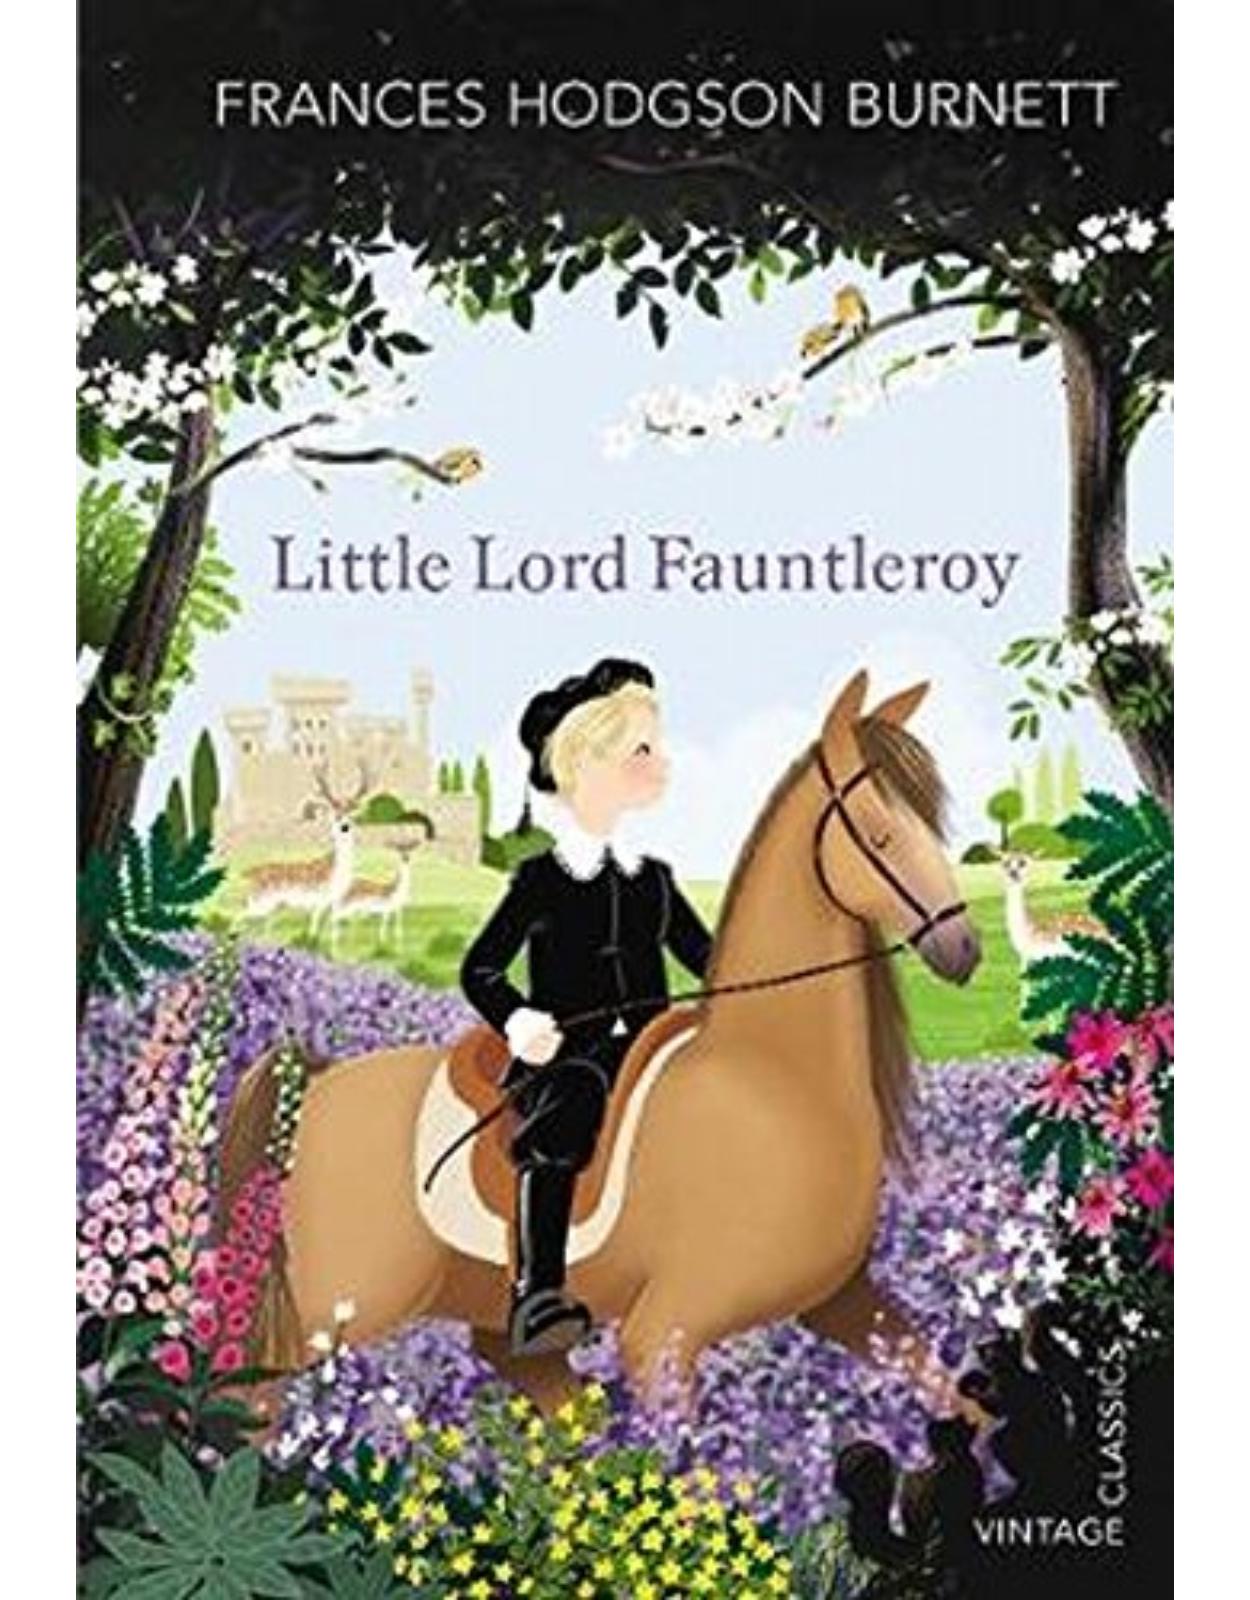 Little Lord Fauntleroy (Vintage Children's Classics)